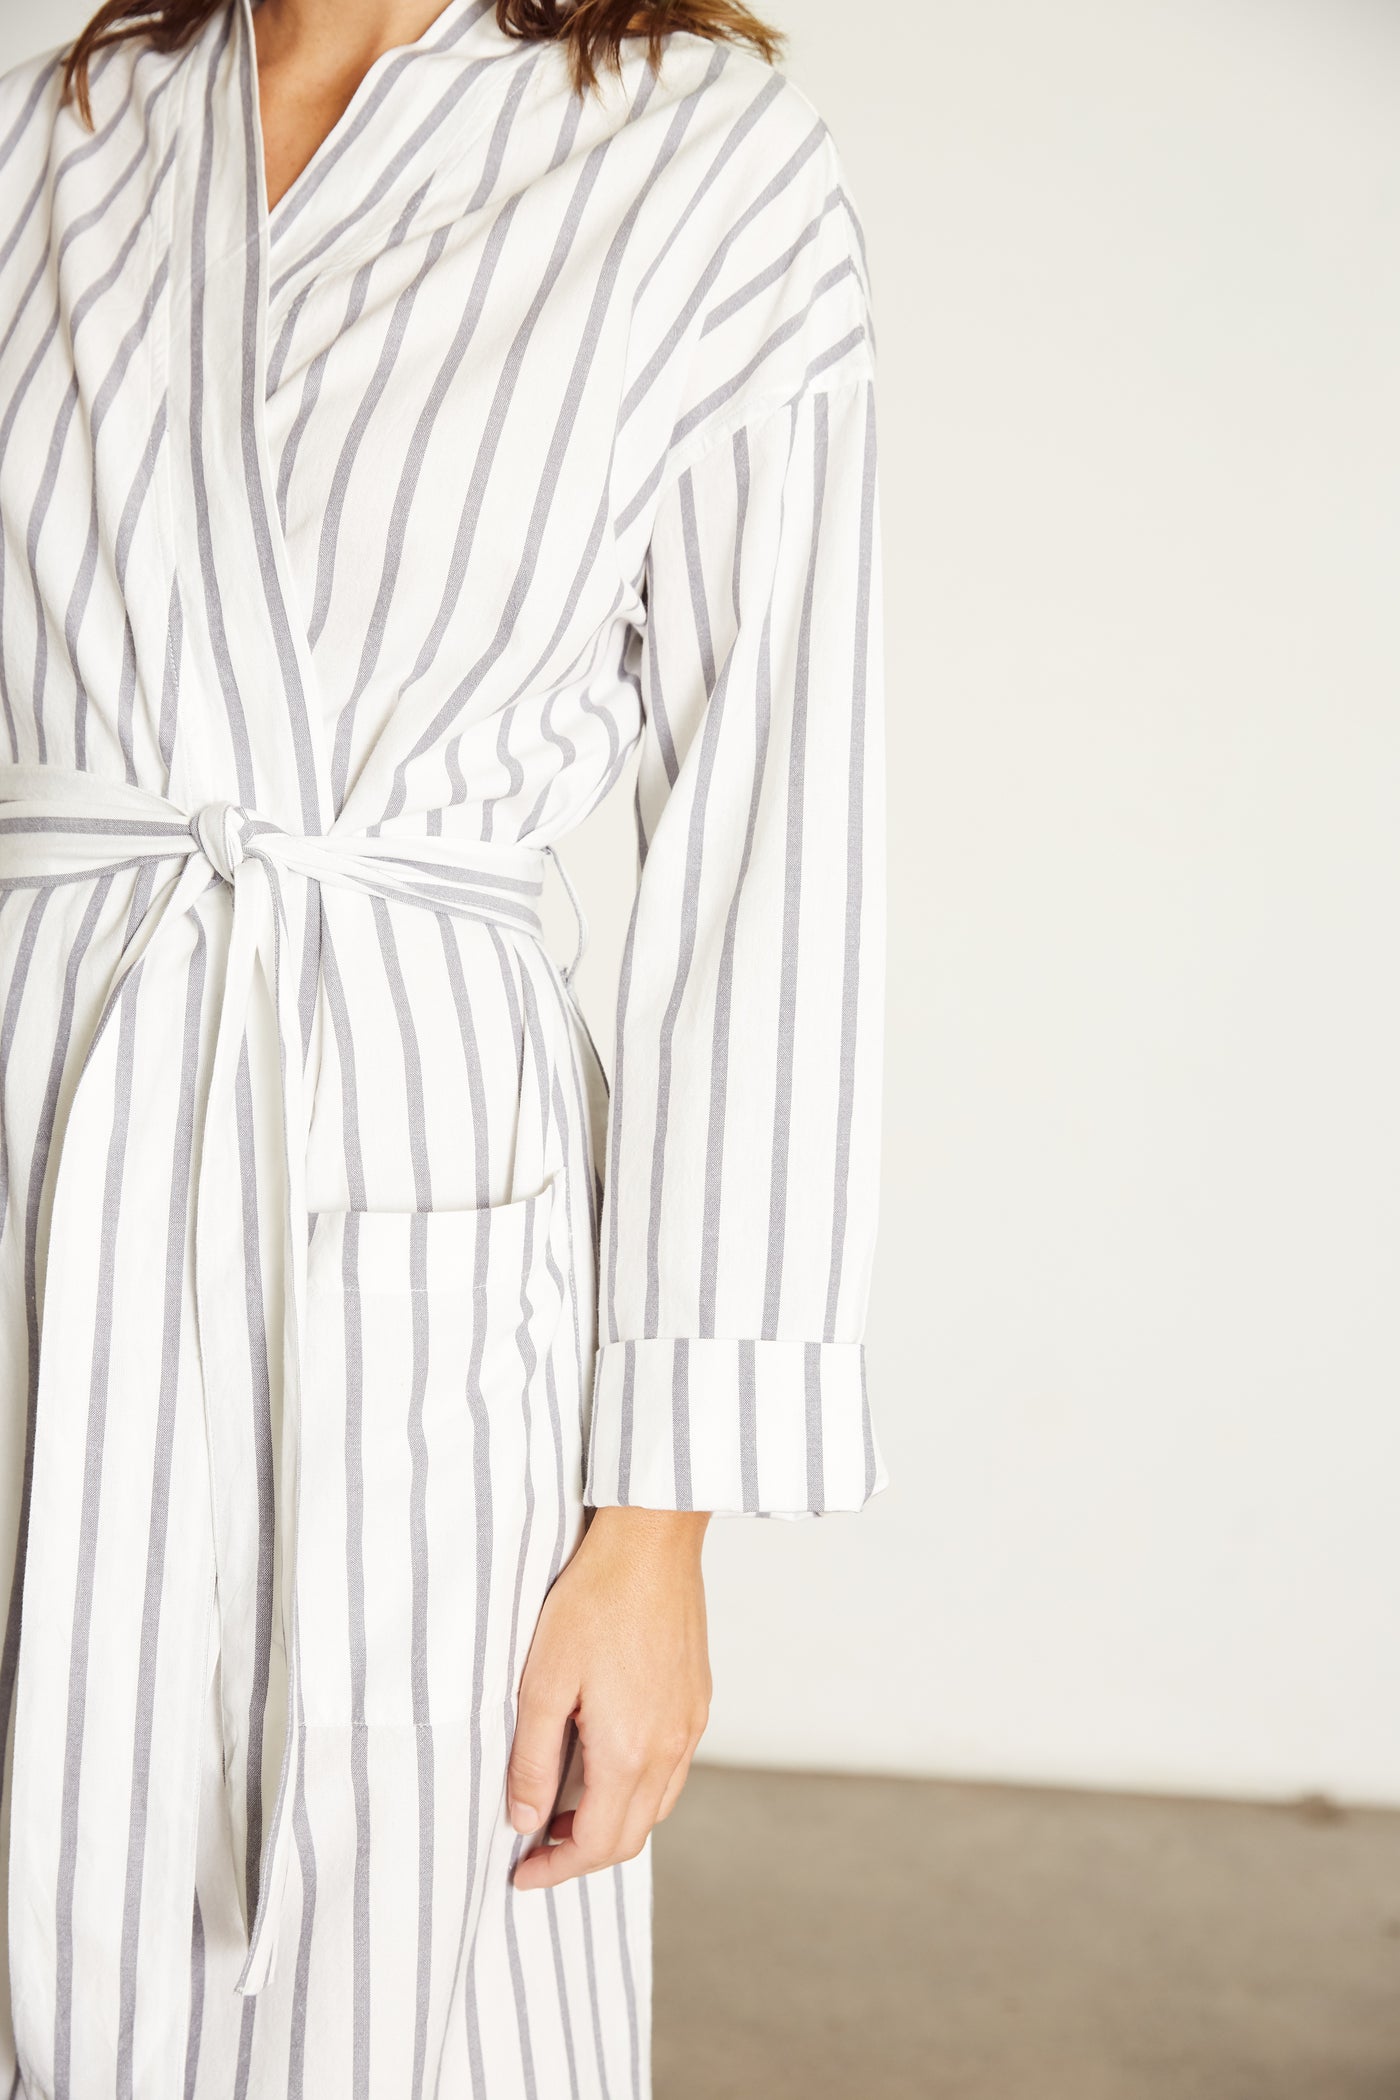 Women’s Robe.  Made from 100% organic cotton.  White, with a navy stripe.  This robe has a relaxed-fit with a dropped shoulder, front patch pockets and a tie belt. Finished with French seams.